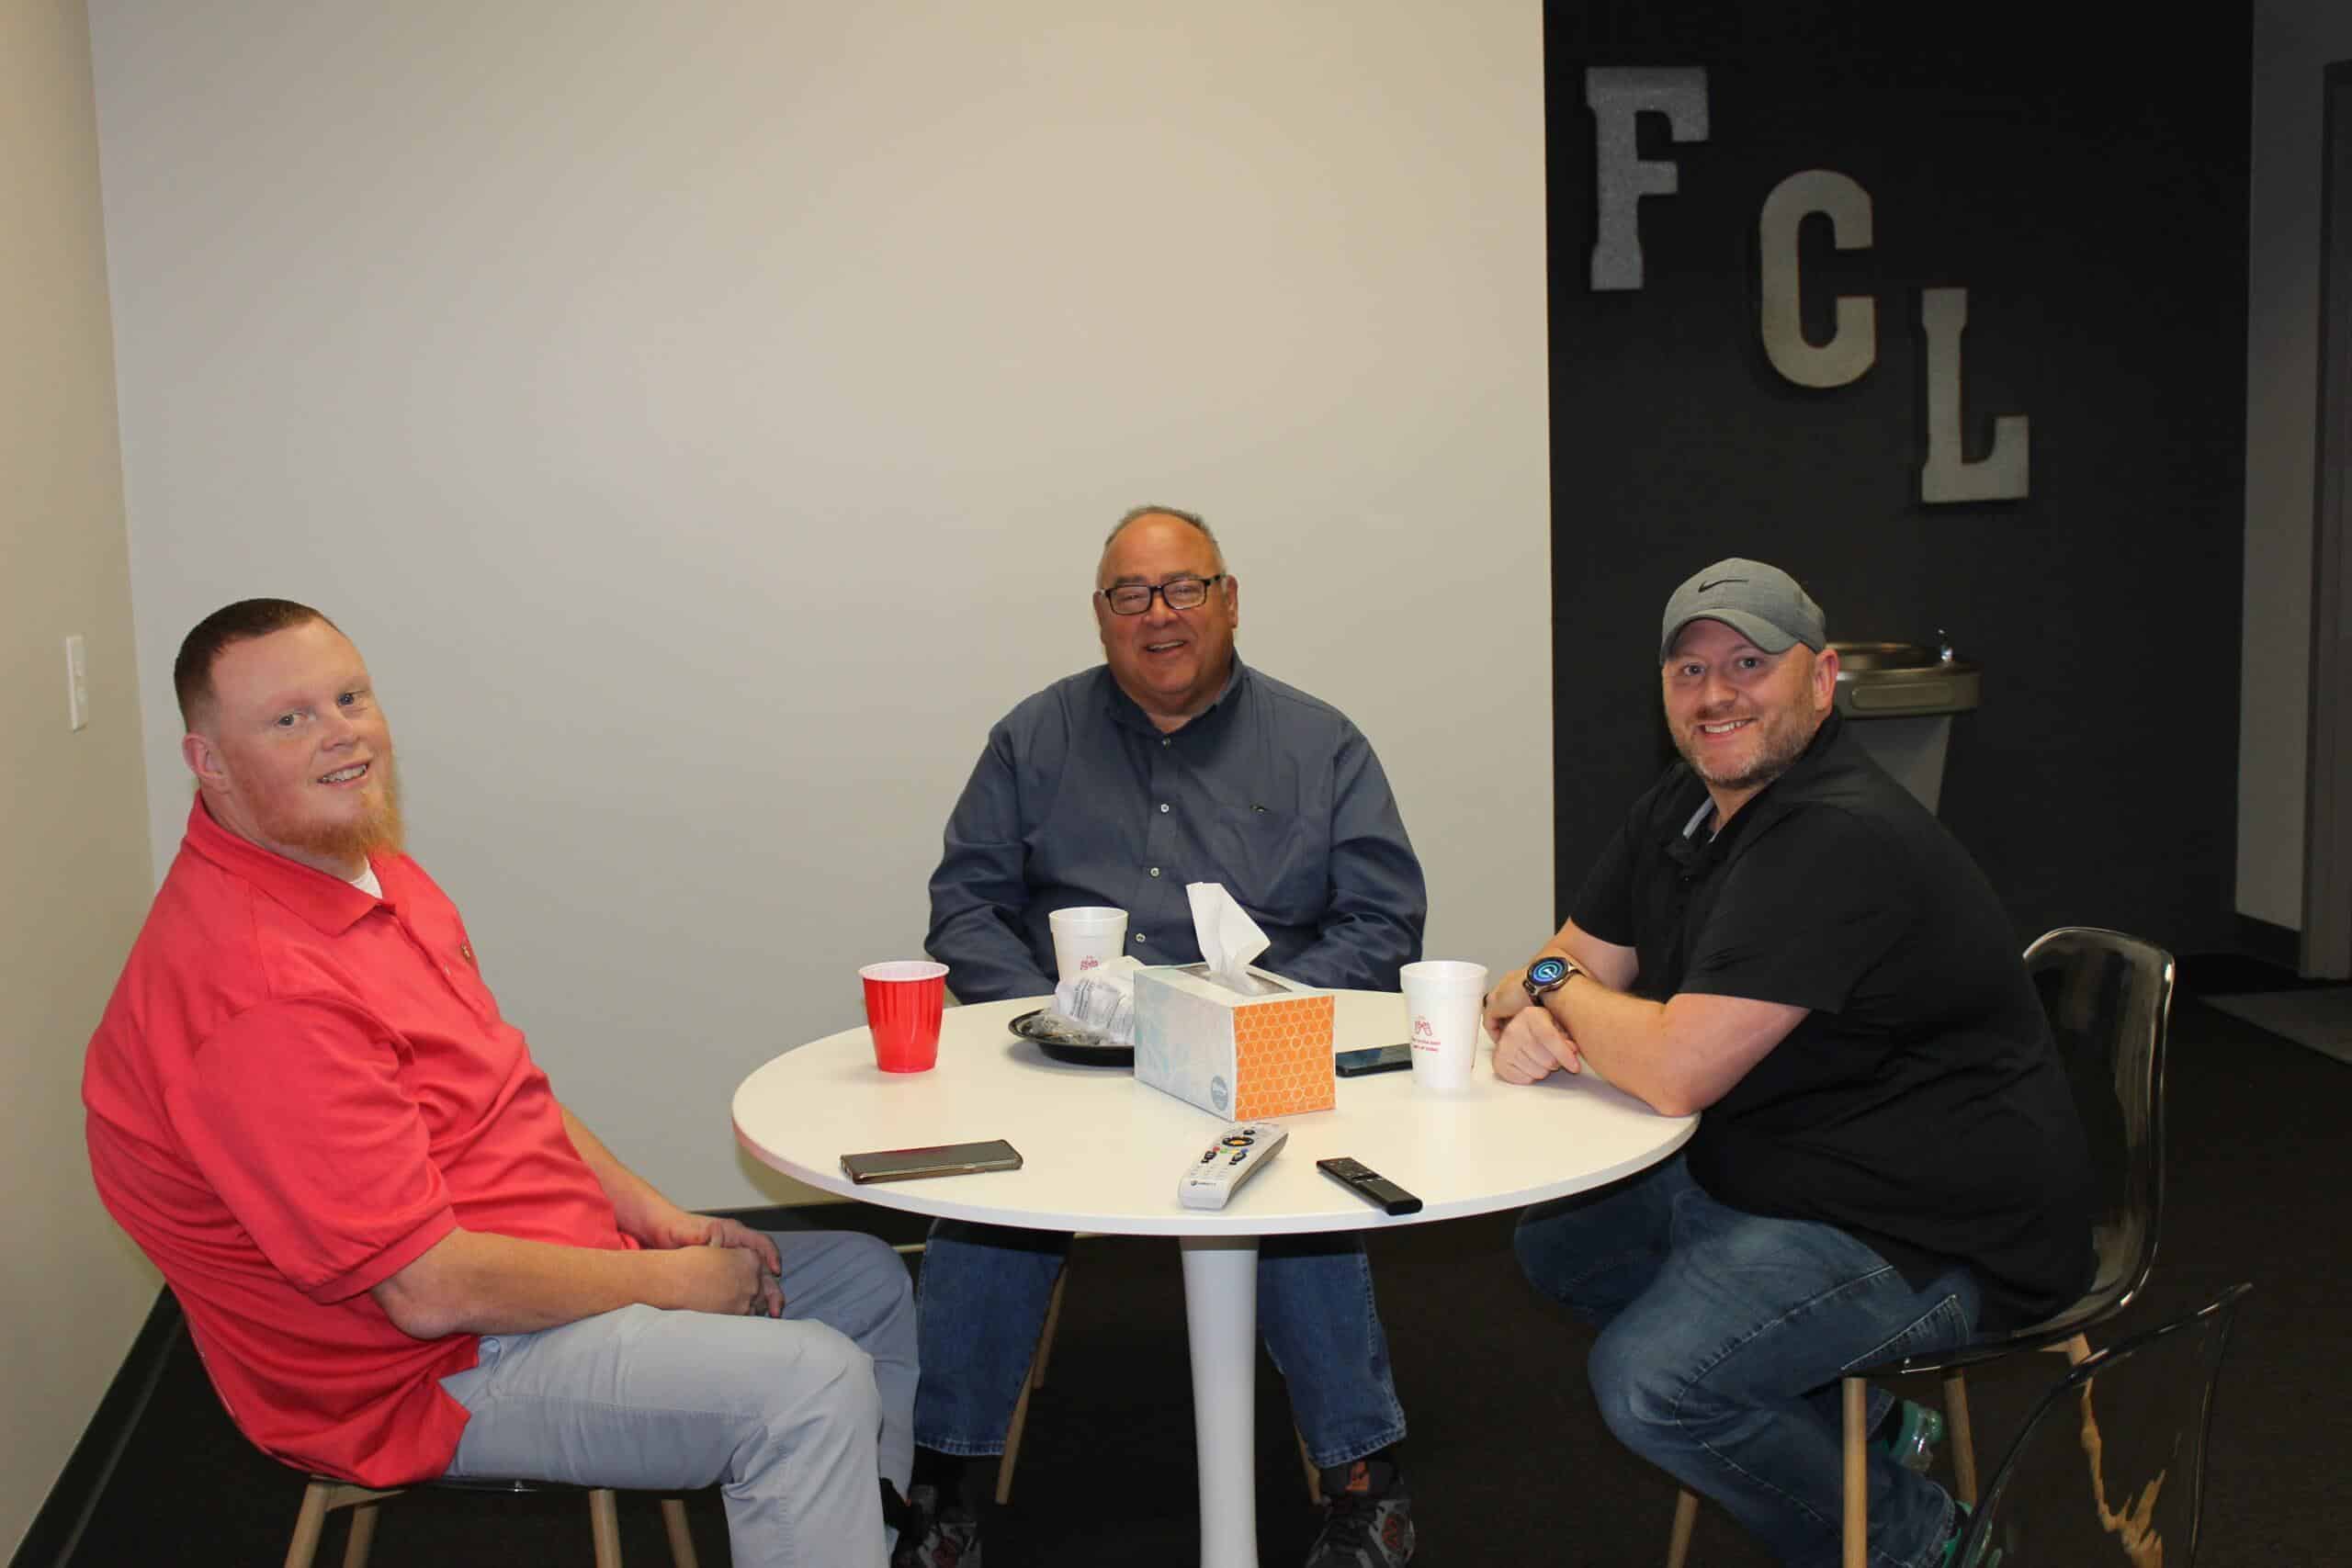 First Call Employees, David, Chuck, and Chris, finishing lunch in the breakroom.